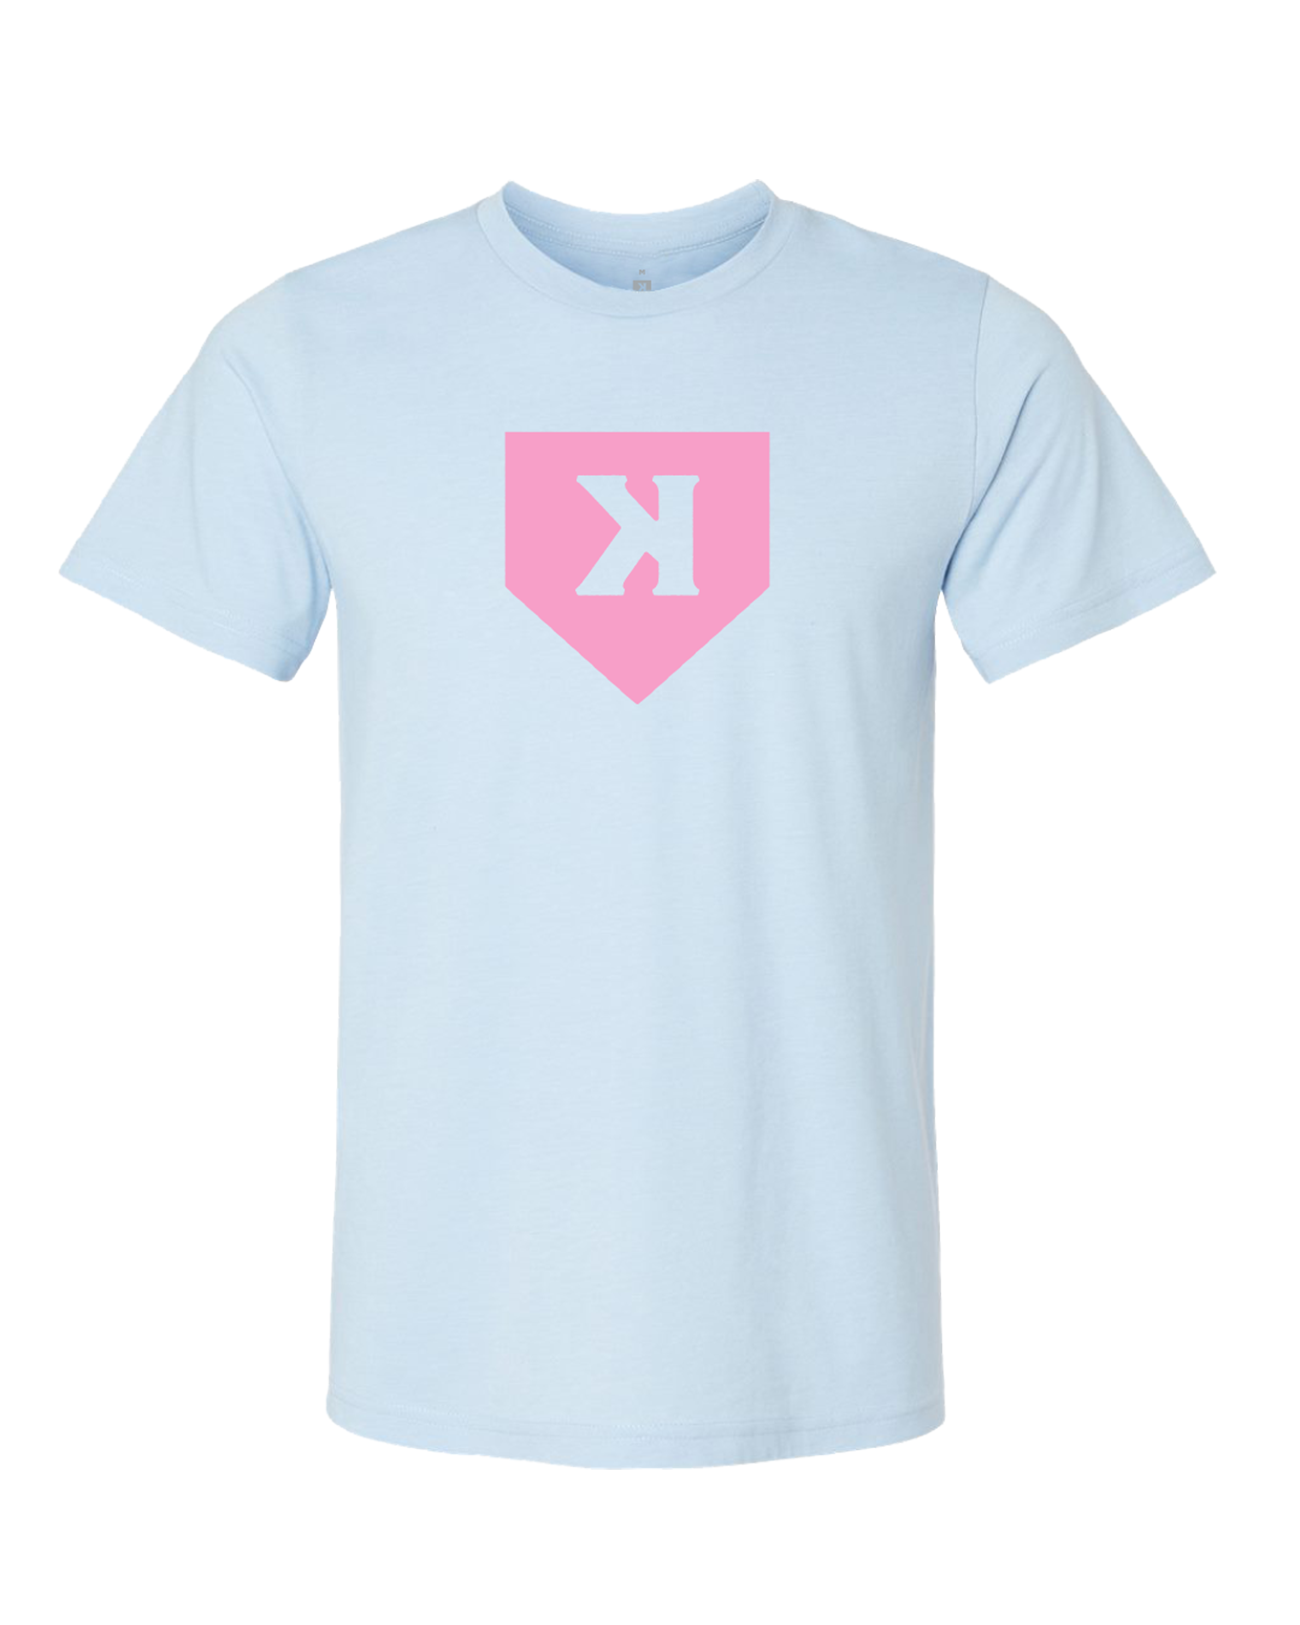 Cotton Candy Blue Tee